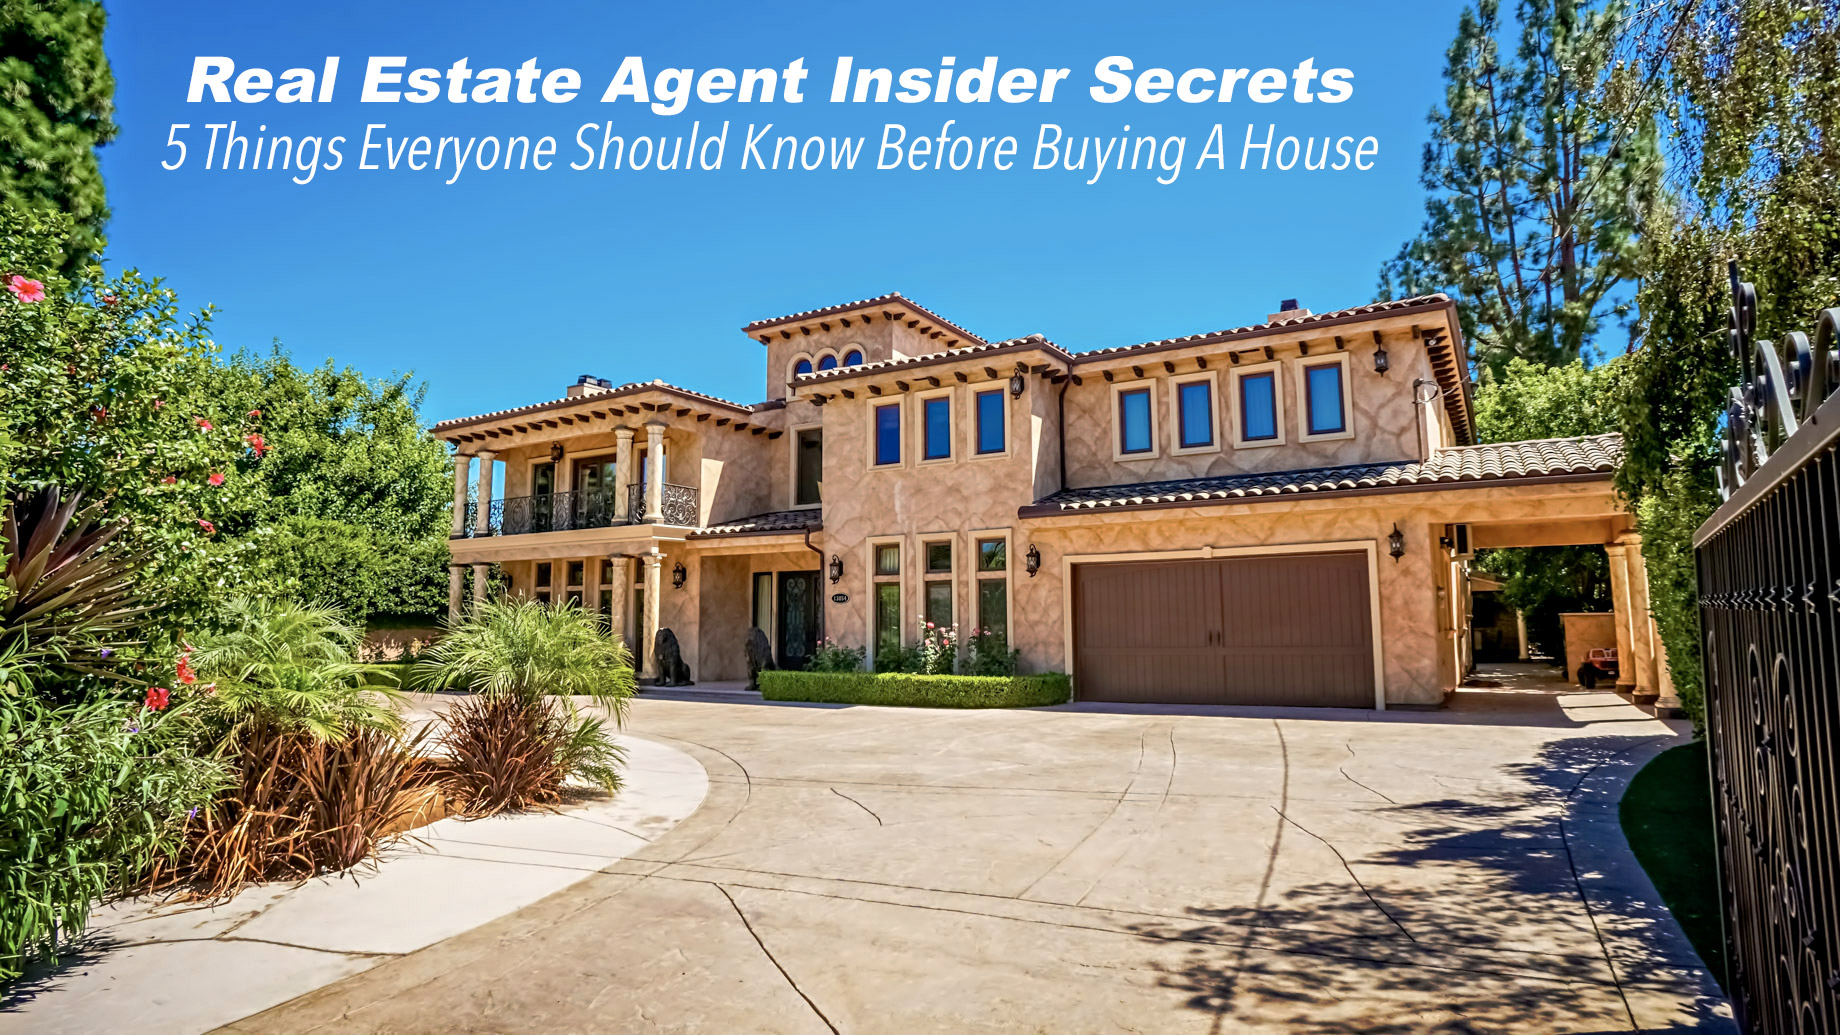 Real Estate Agent Insider Secrets - 5 Things Everyone Should Know Before Buying A House